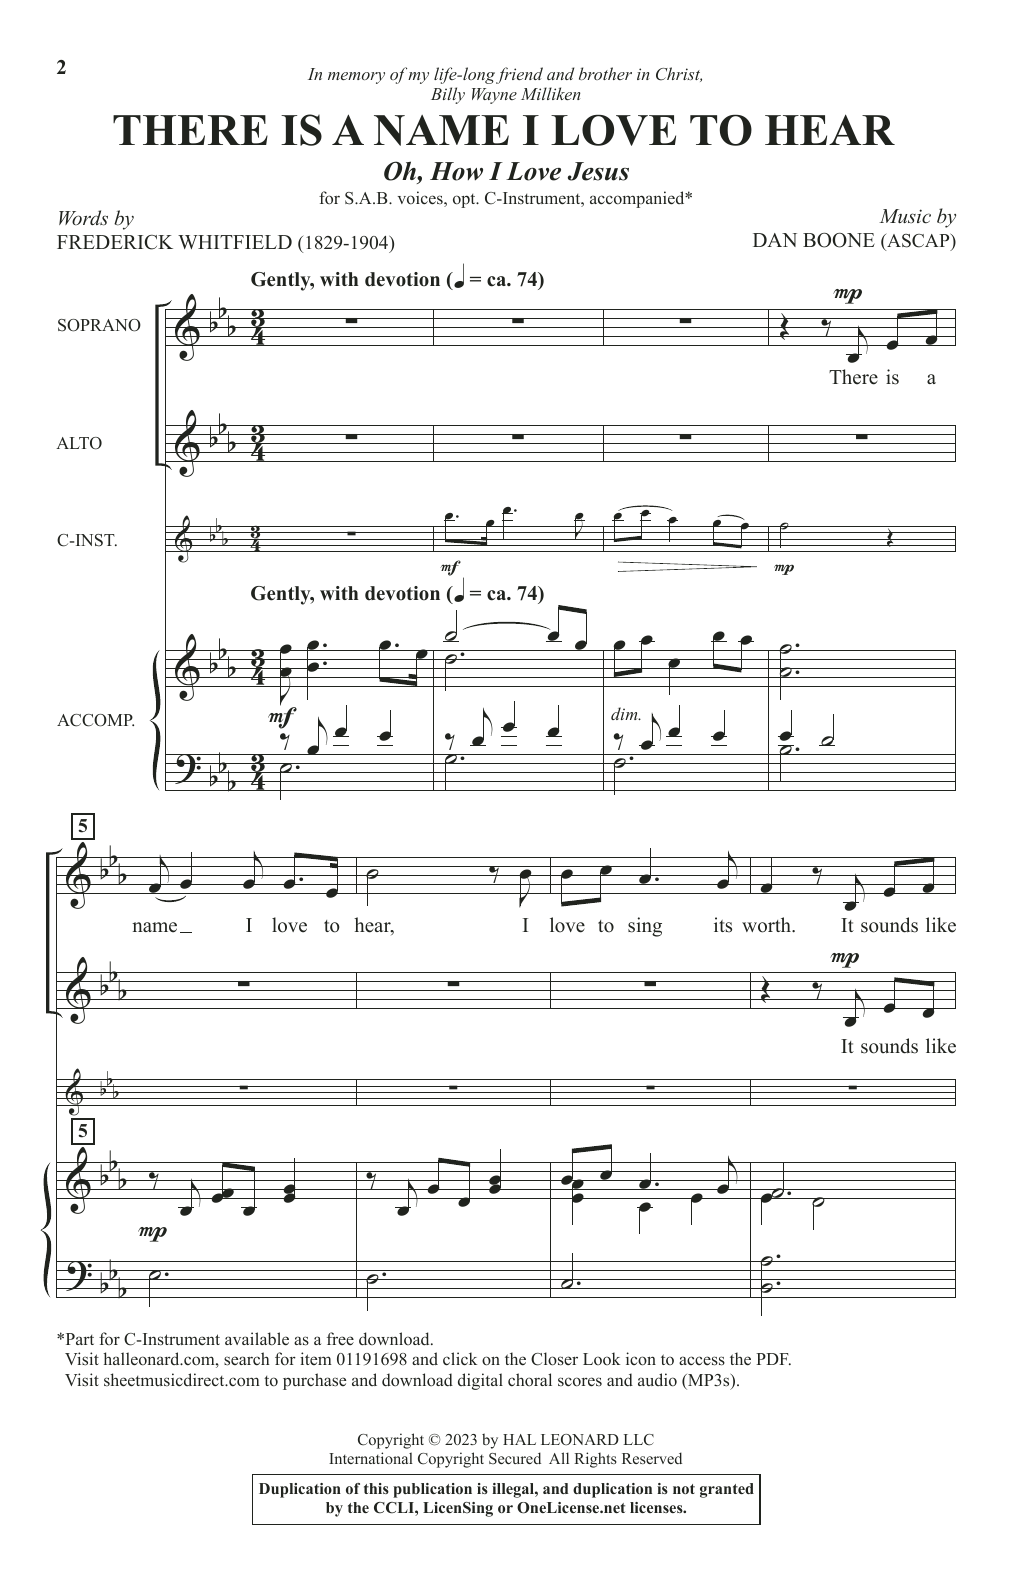 Download Dan Boone There Is A Name I Love To Hear (Oh, How Sheet Music